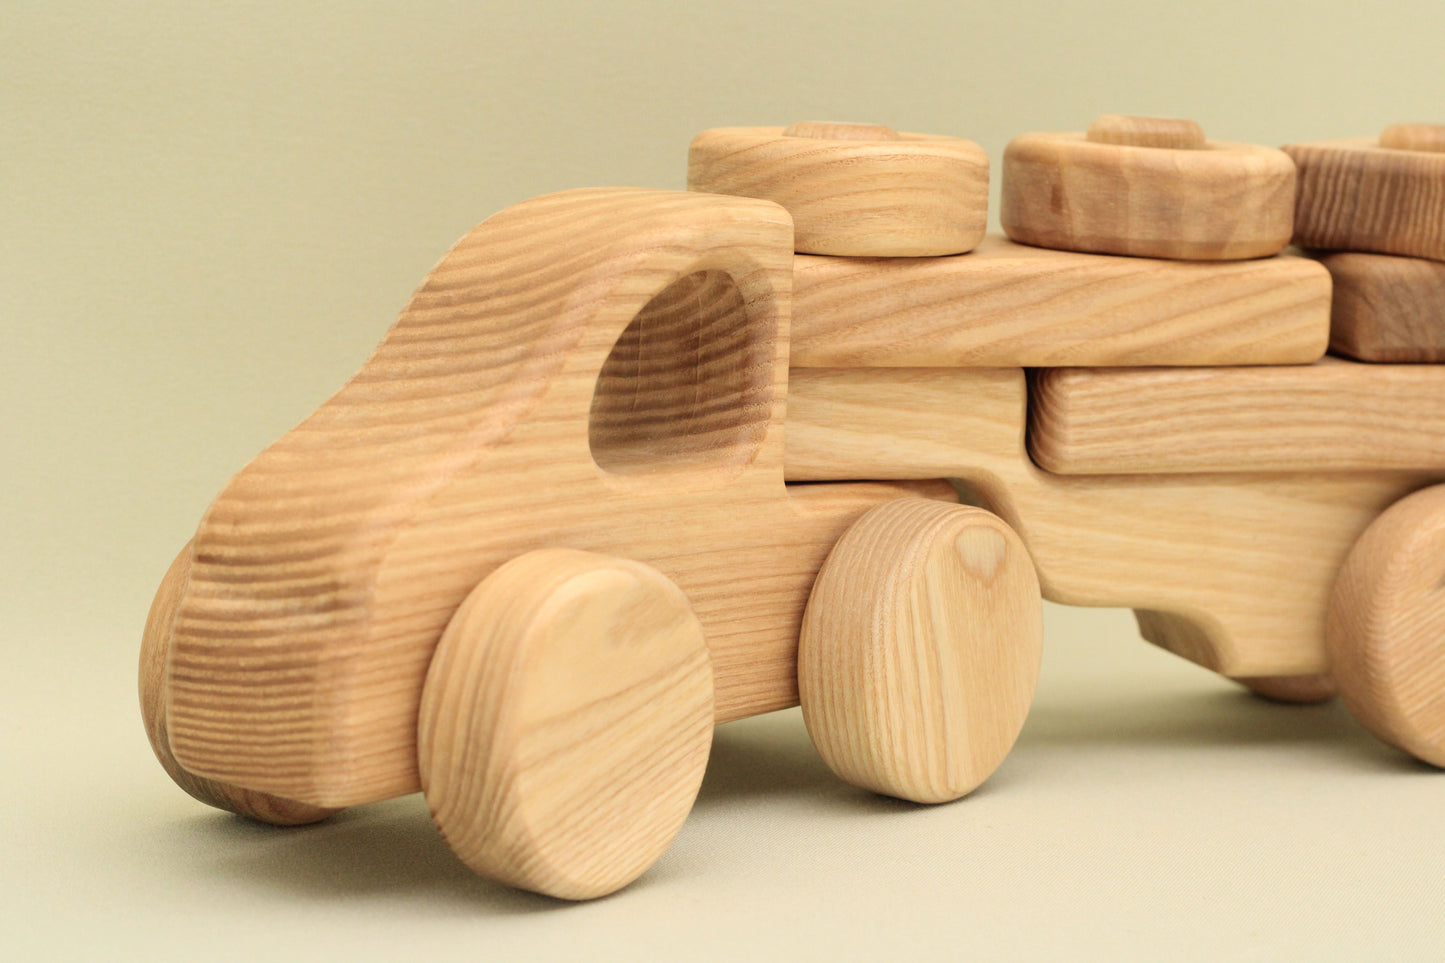 Lotes Toys Wooden Construction Vehicles Car BT10